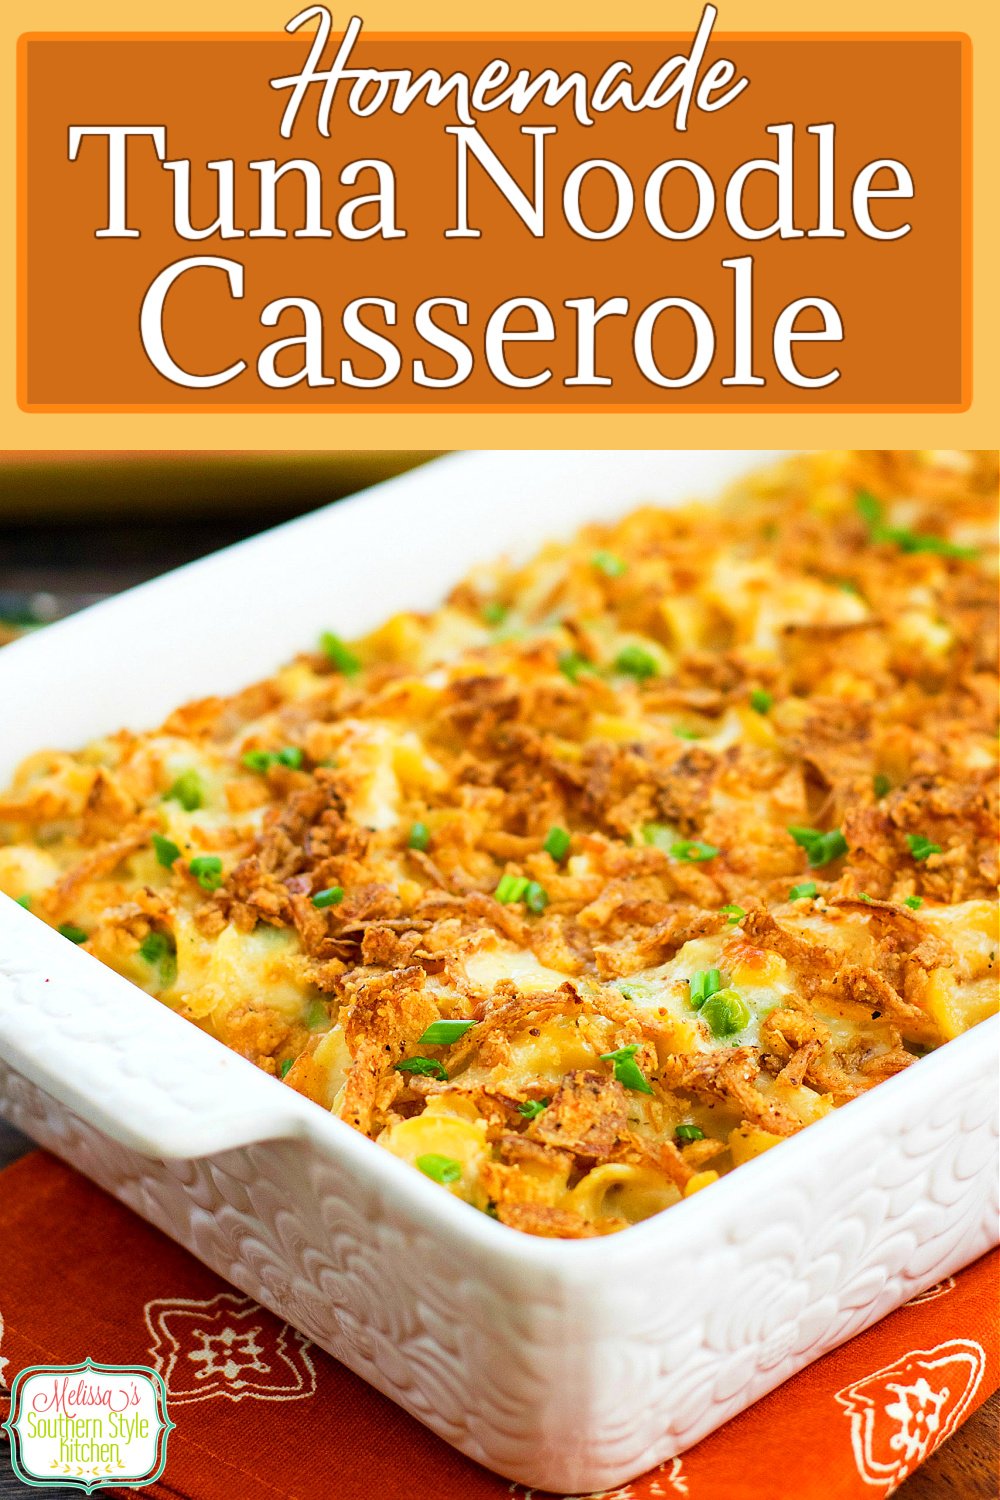 No canned soups needed to make this Homemade Tuna Noodle Casserole #tunacasserole #tunanoodlcasserole #casseroles #tunarecipes #seafood #casserolerecipes #pasta #dinnerideas #dinner #southernfood #southernrecipes via @melissasssk